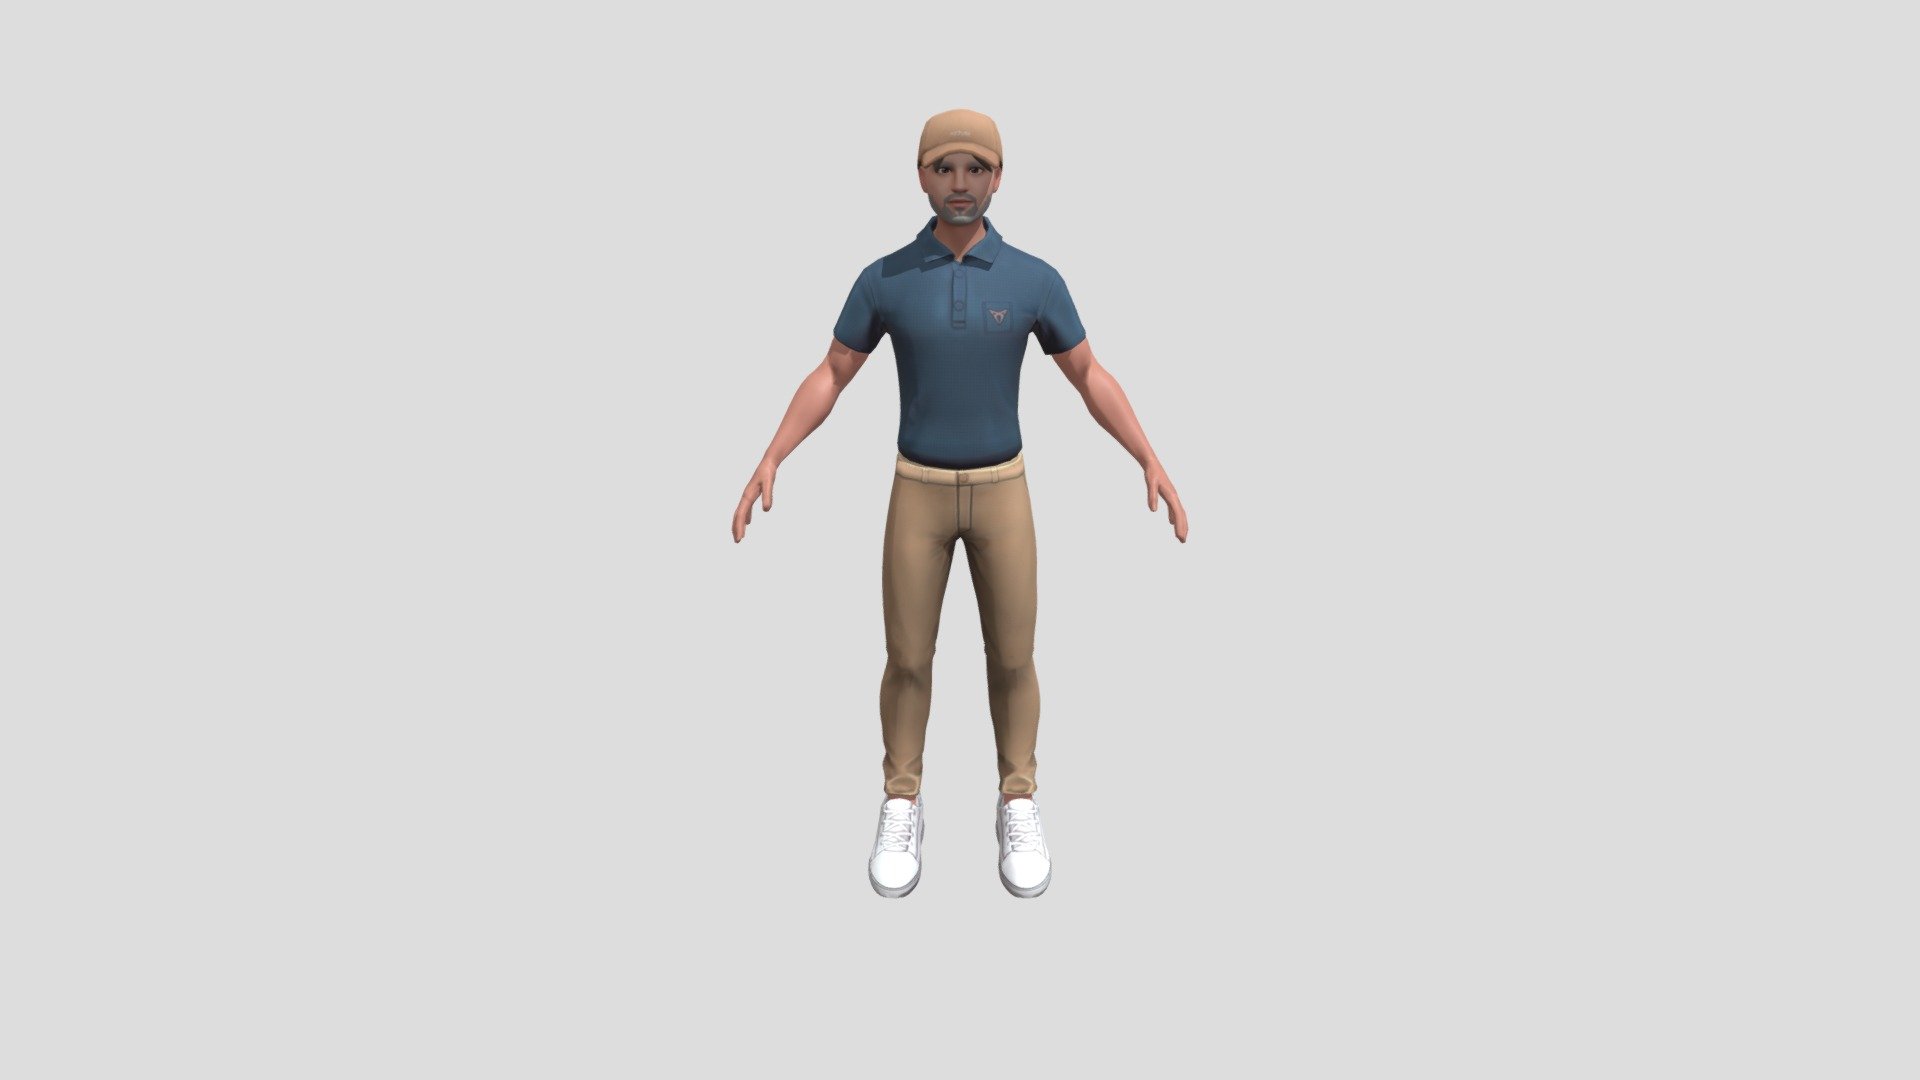 Free Avatar for iClone
Free Avatar for Character Creator
Free Avatar for Blender
Free Avatar for Cinema 4D

Download and use it as you want - Free Avatar for iClone, - Download Free 3D model by Asfandyar Hesami (@allkhanan1) 3d model